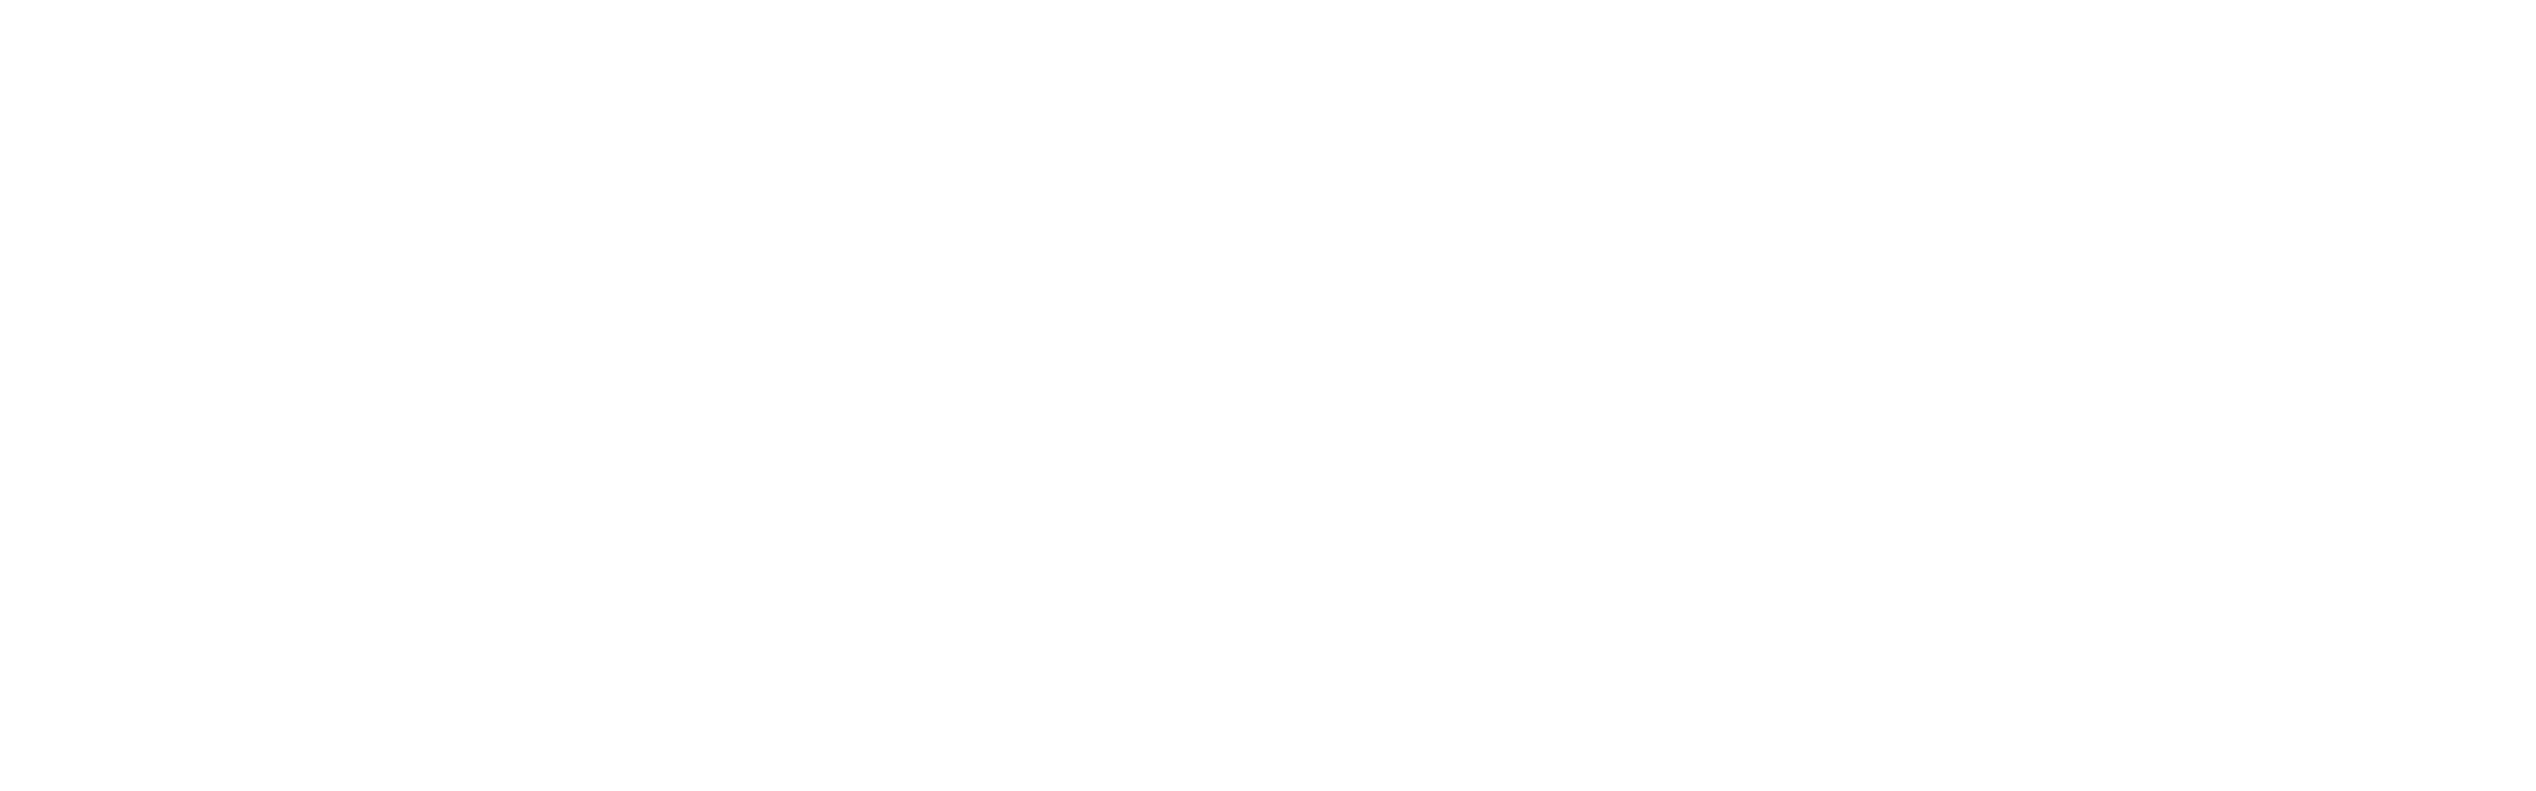 Why Foster First